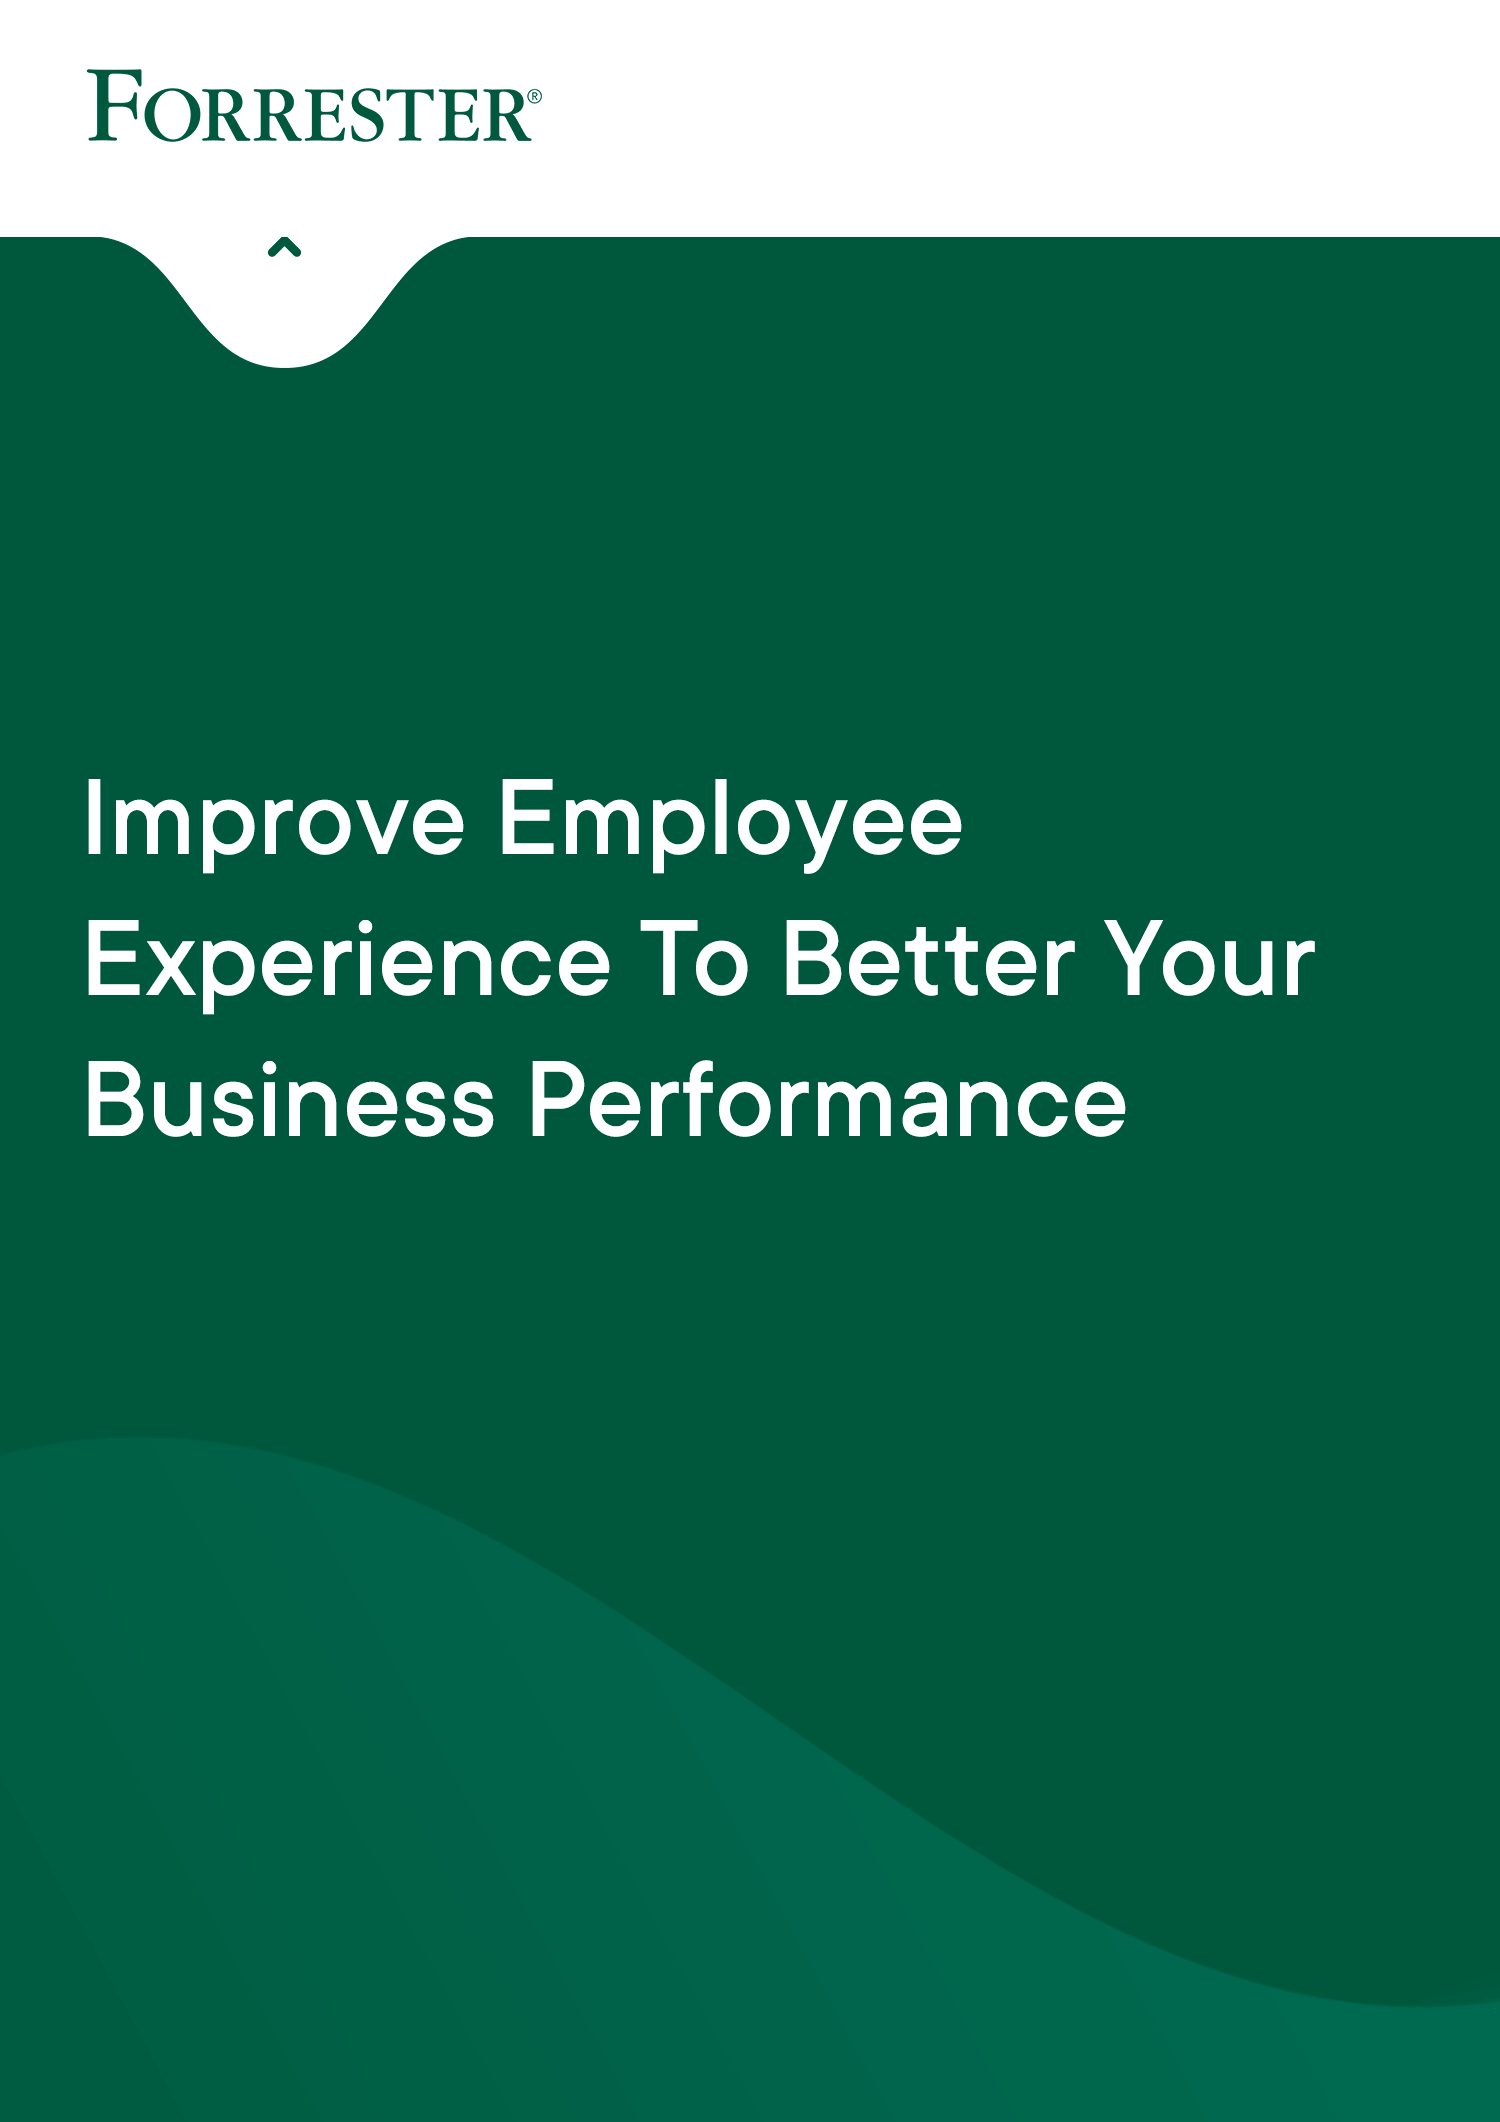 Analyst Research: Improve Employee Experience To Better Your Business Performance